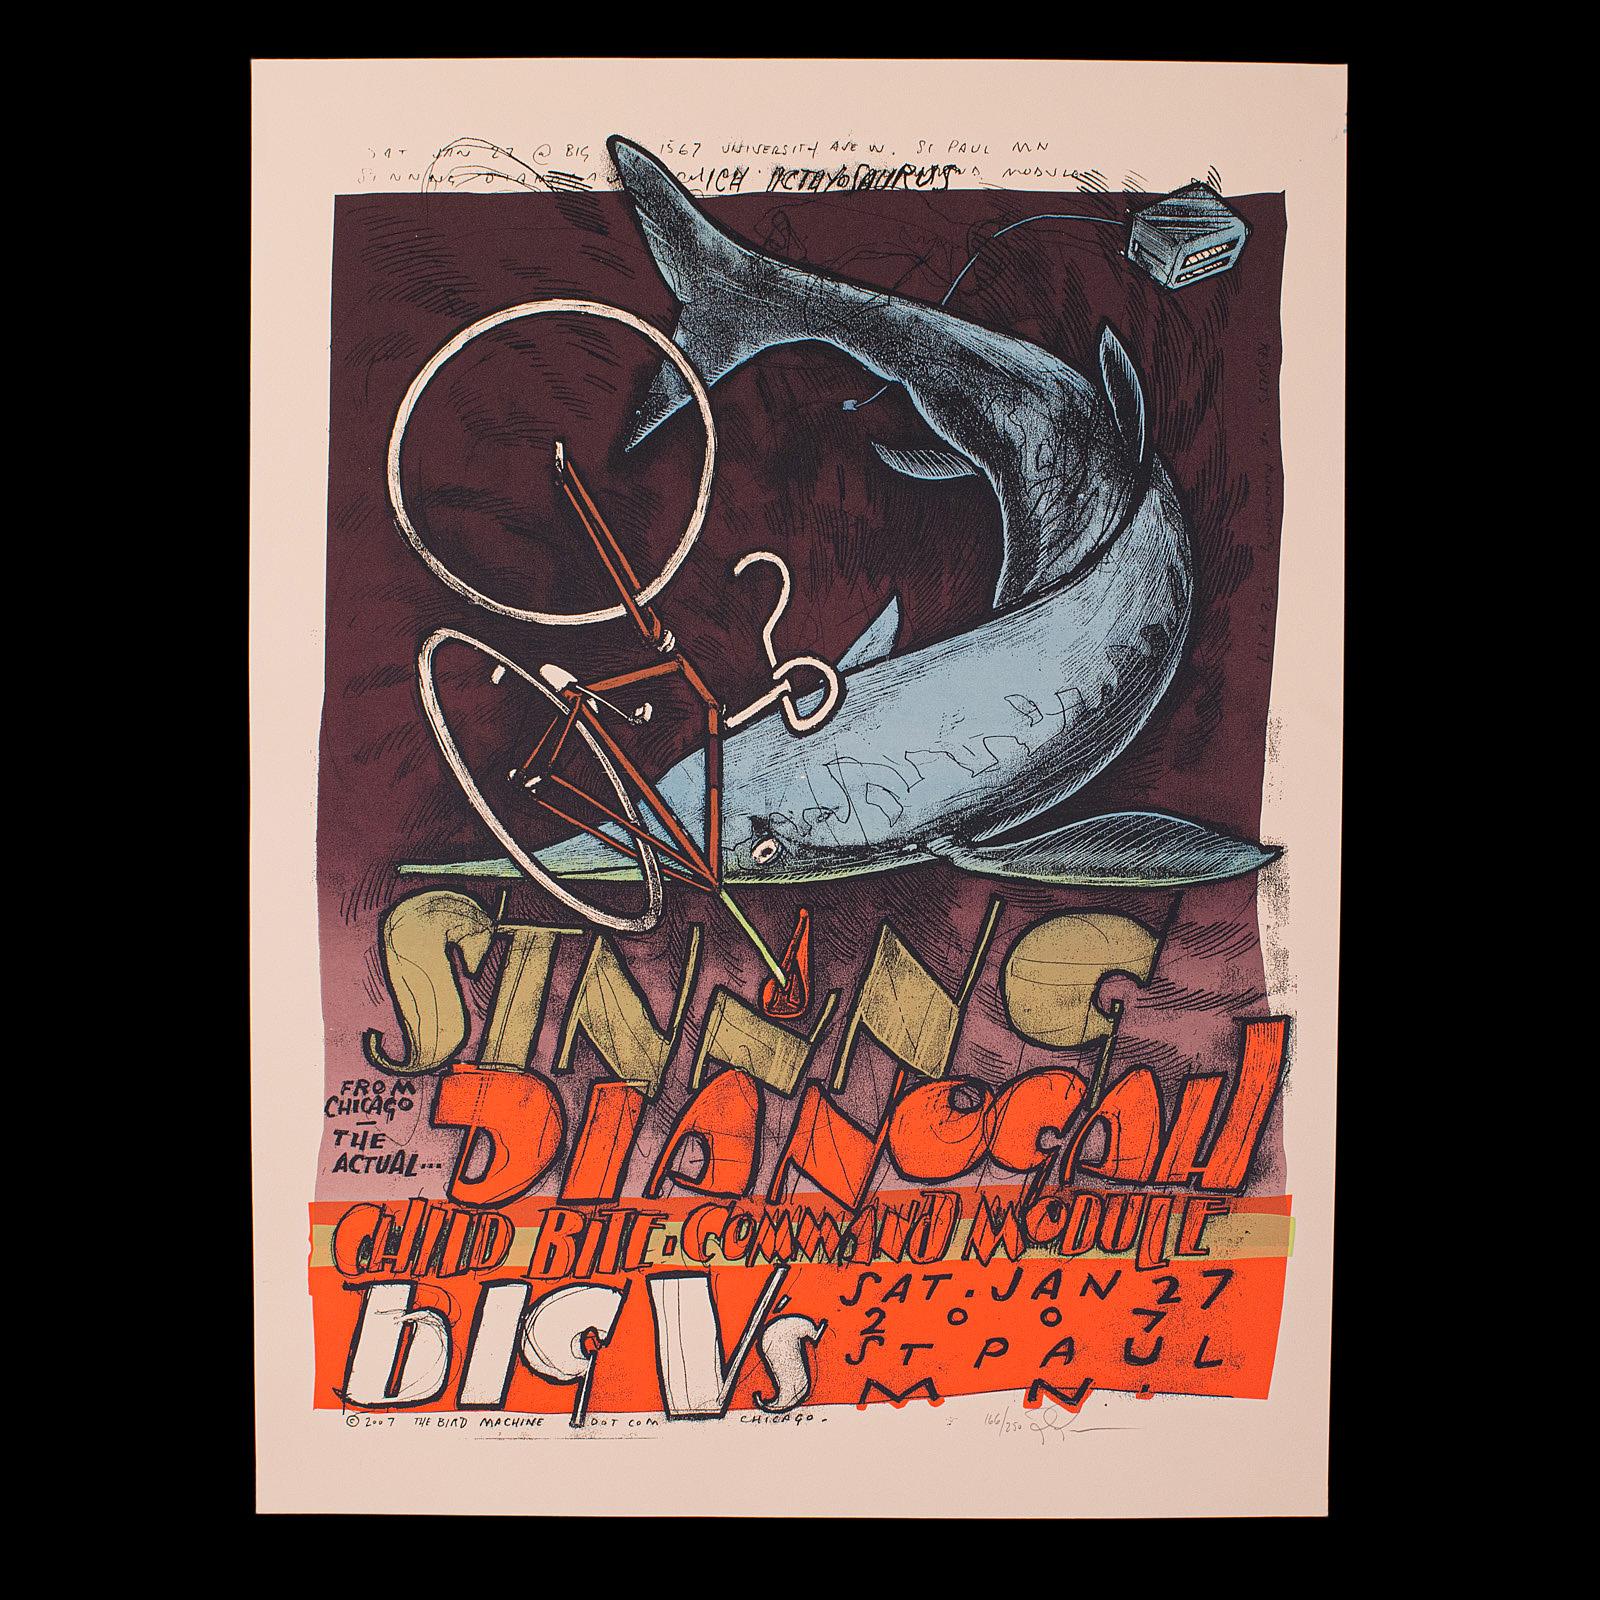 This is a decorative art screenprint. An American, concert poster, signed by and featuring the artist's band Dianogah, dated to 2007.

Eponymous piece featuring the artist's own band on the bill
In gallery exhibition quality and good order
Four